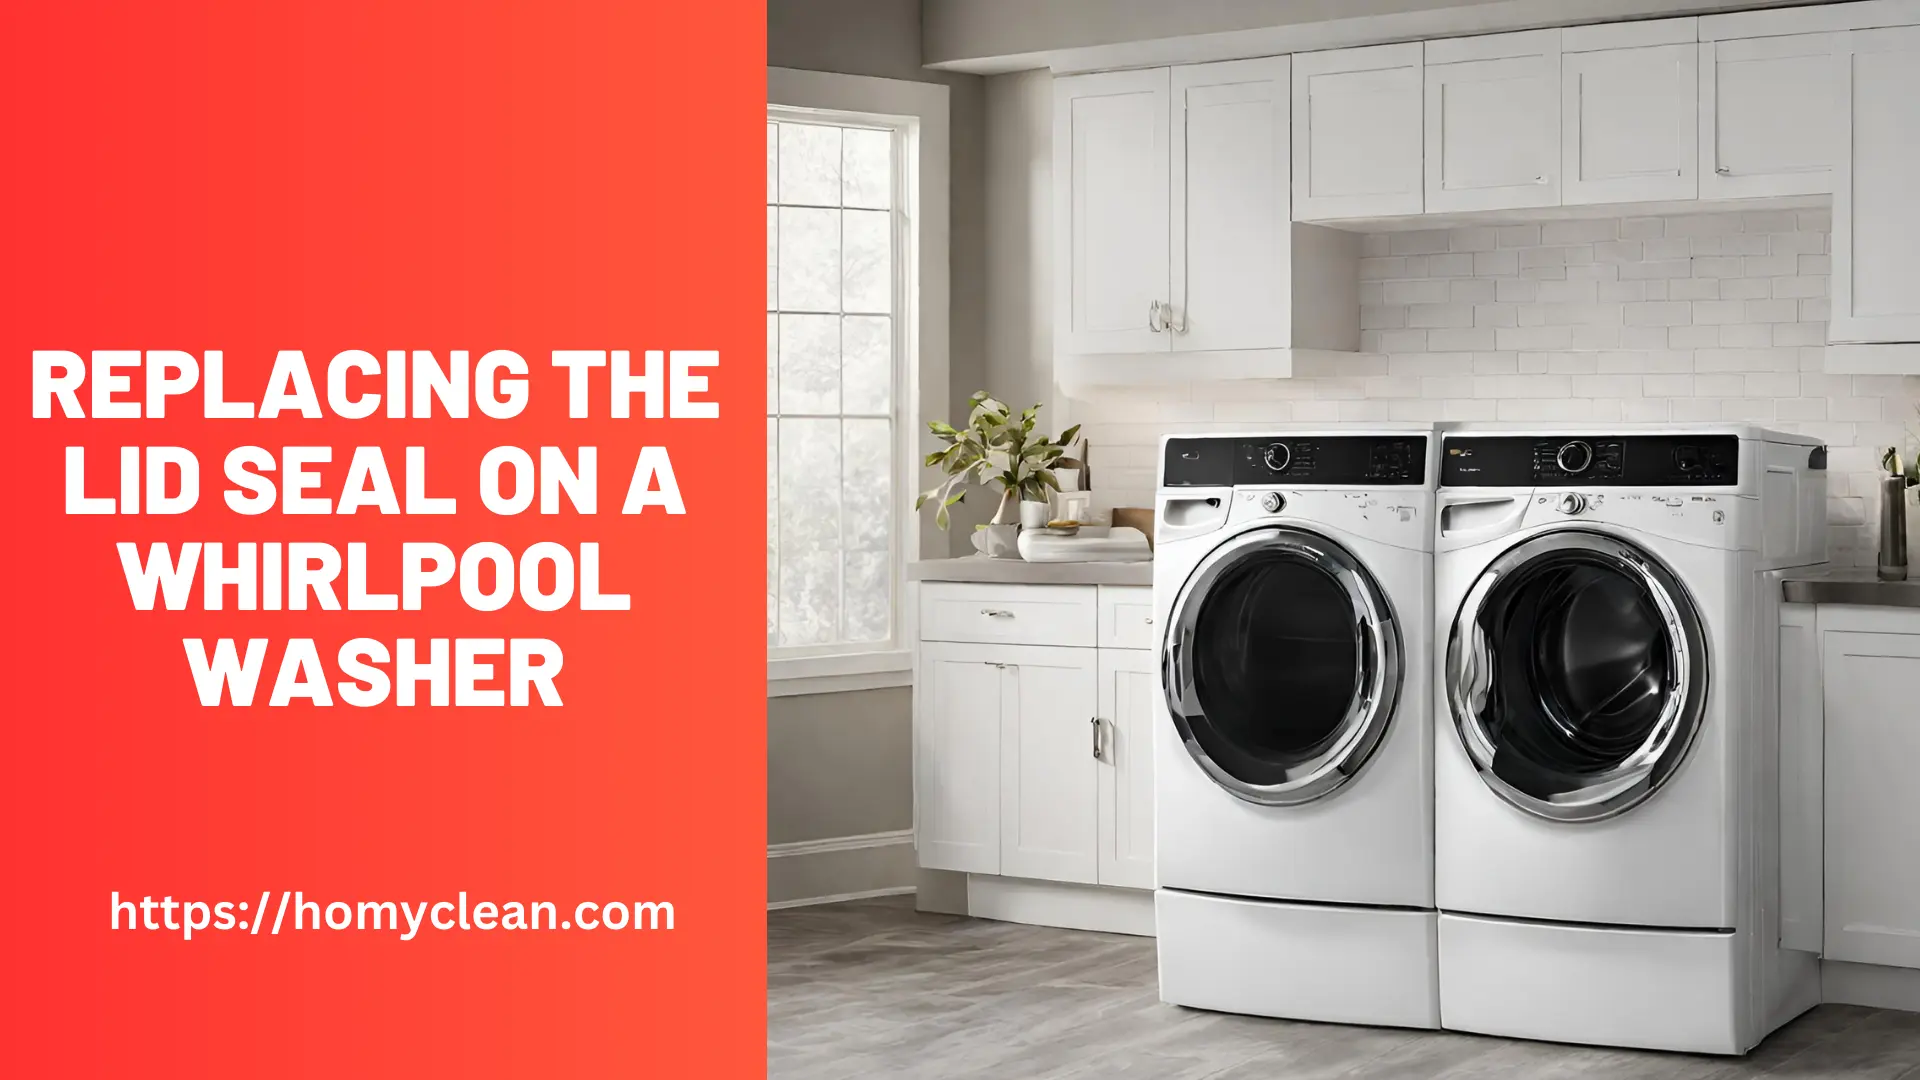 A Step-by-Step Guide to Replacing the Lid Seal on a Whirlpool Washer